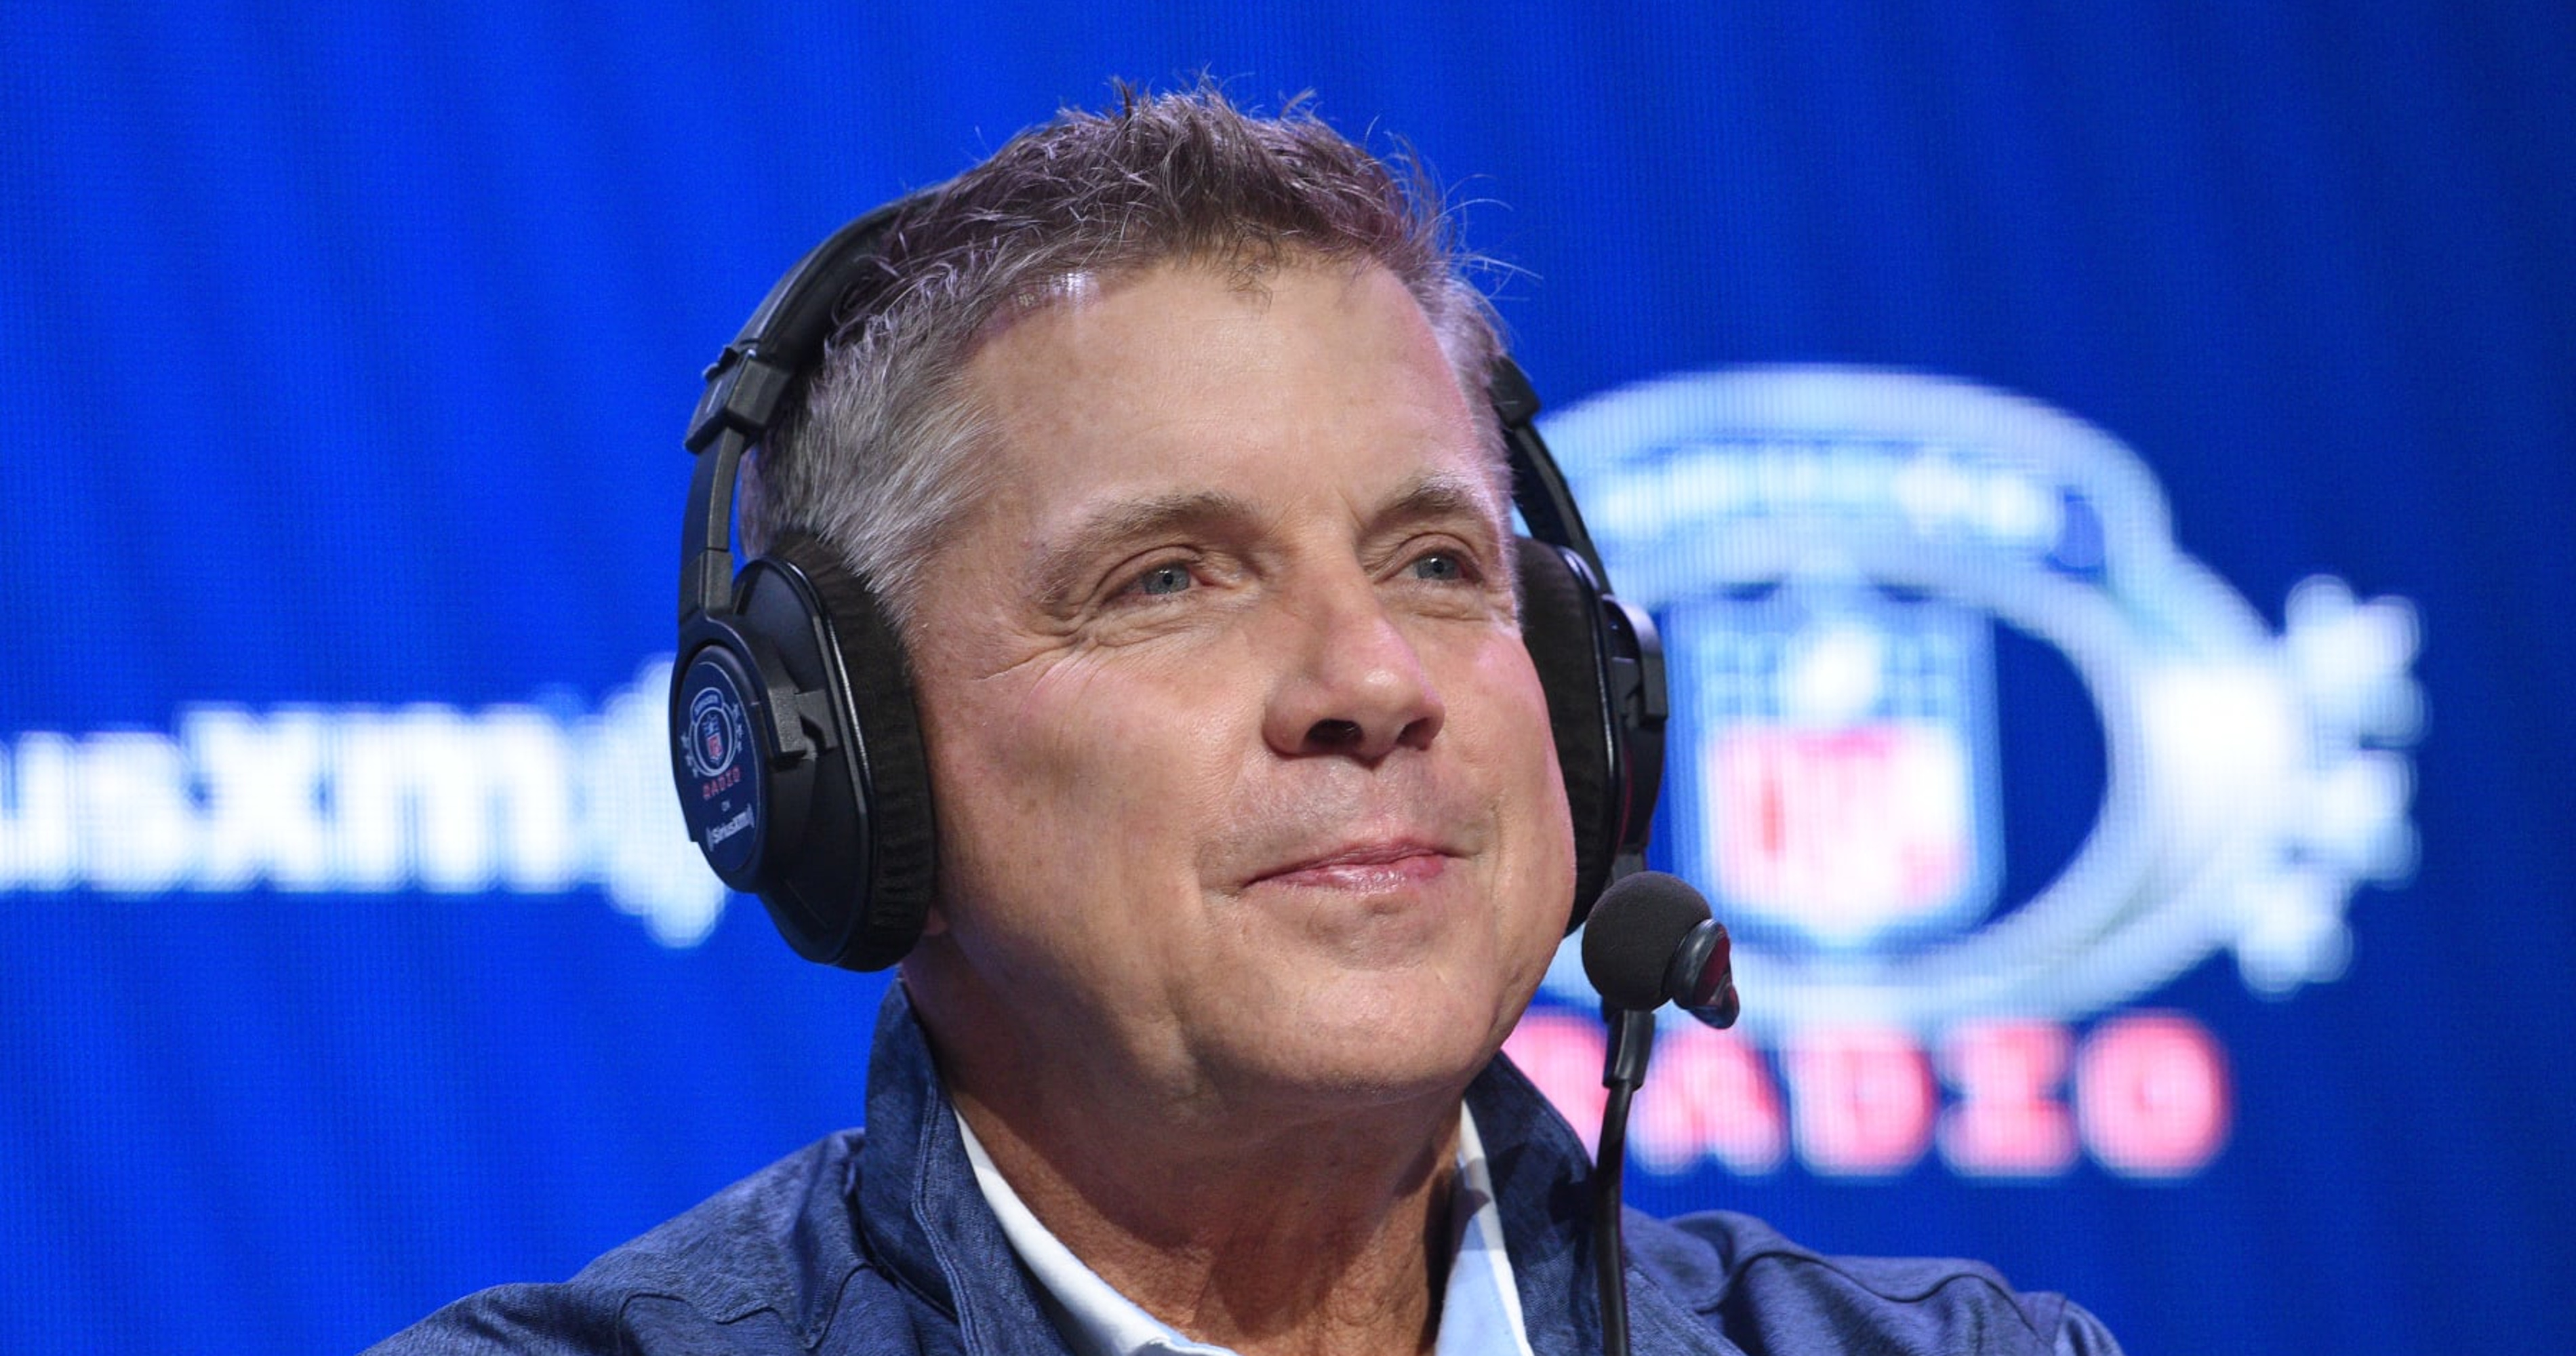 NFL Rumors: Sean Payton Connected to Chargers, Cardinals amid Cowboys Buzz